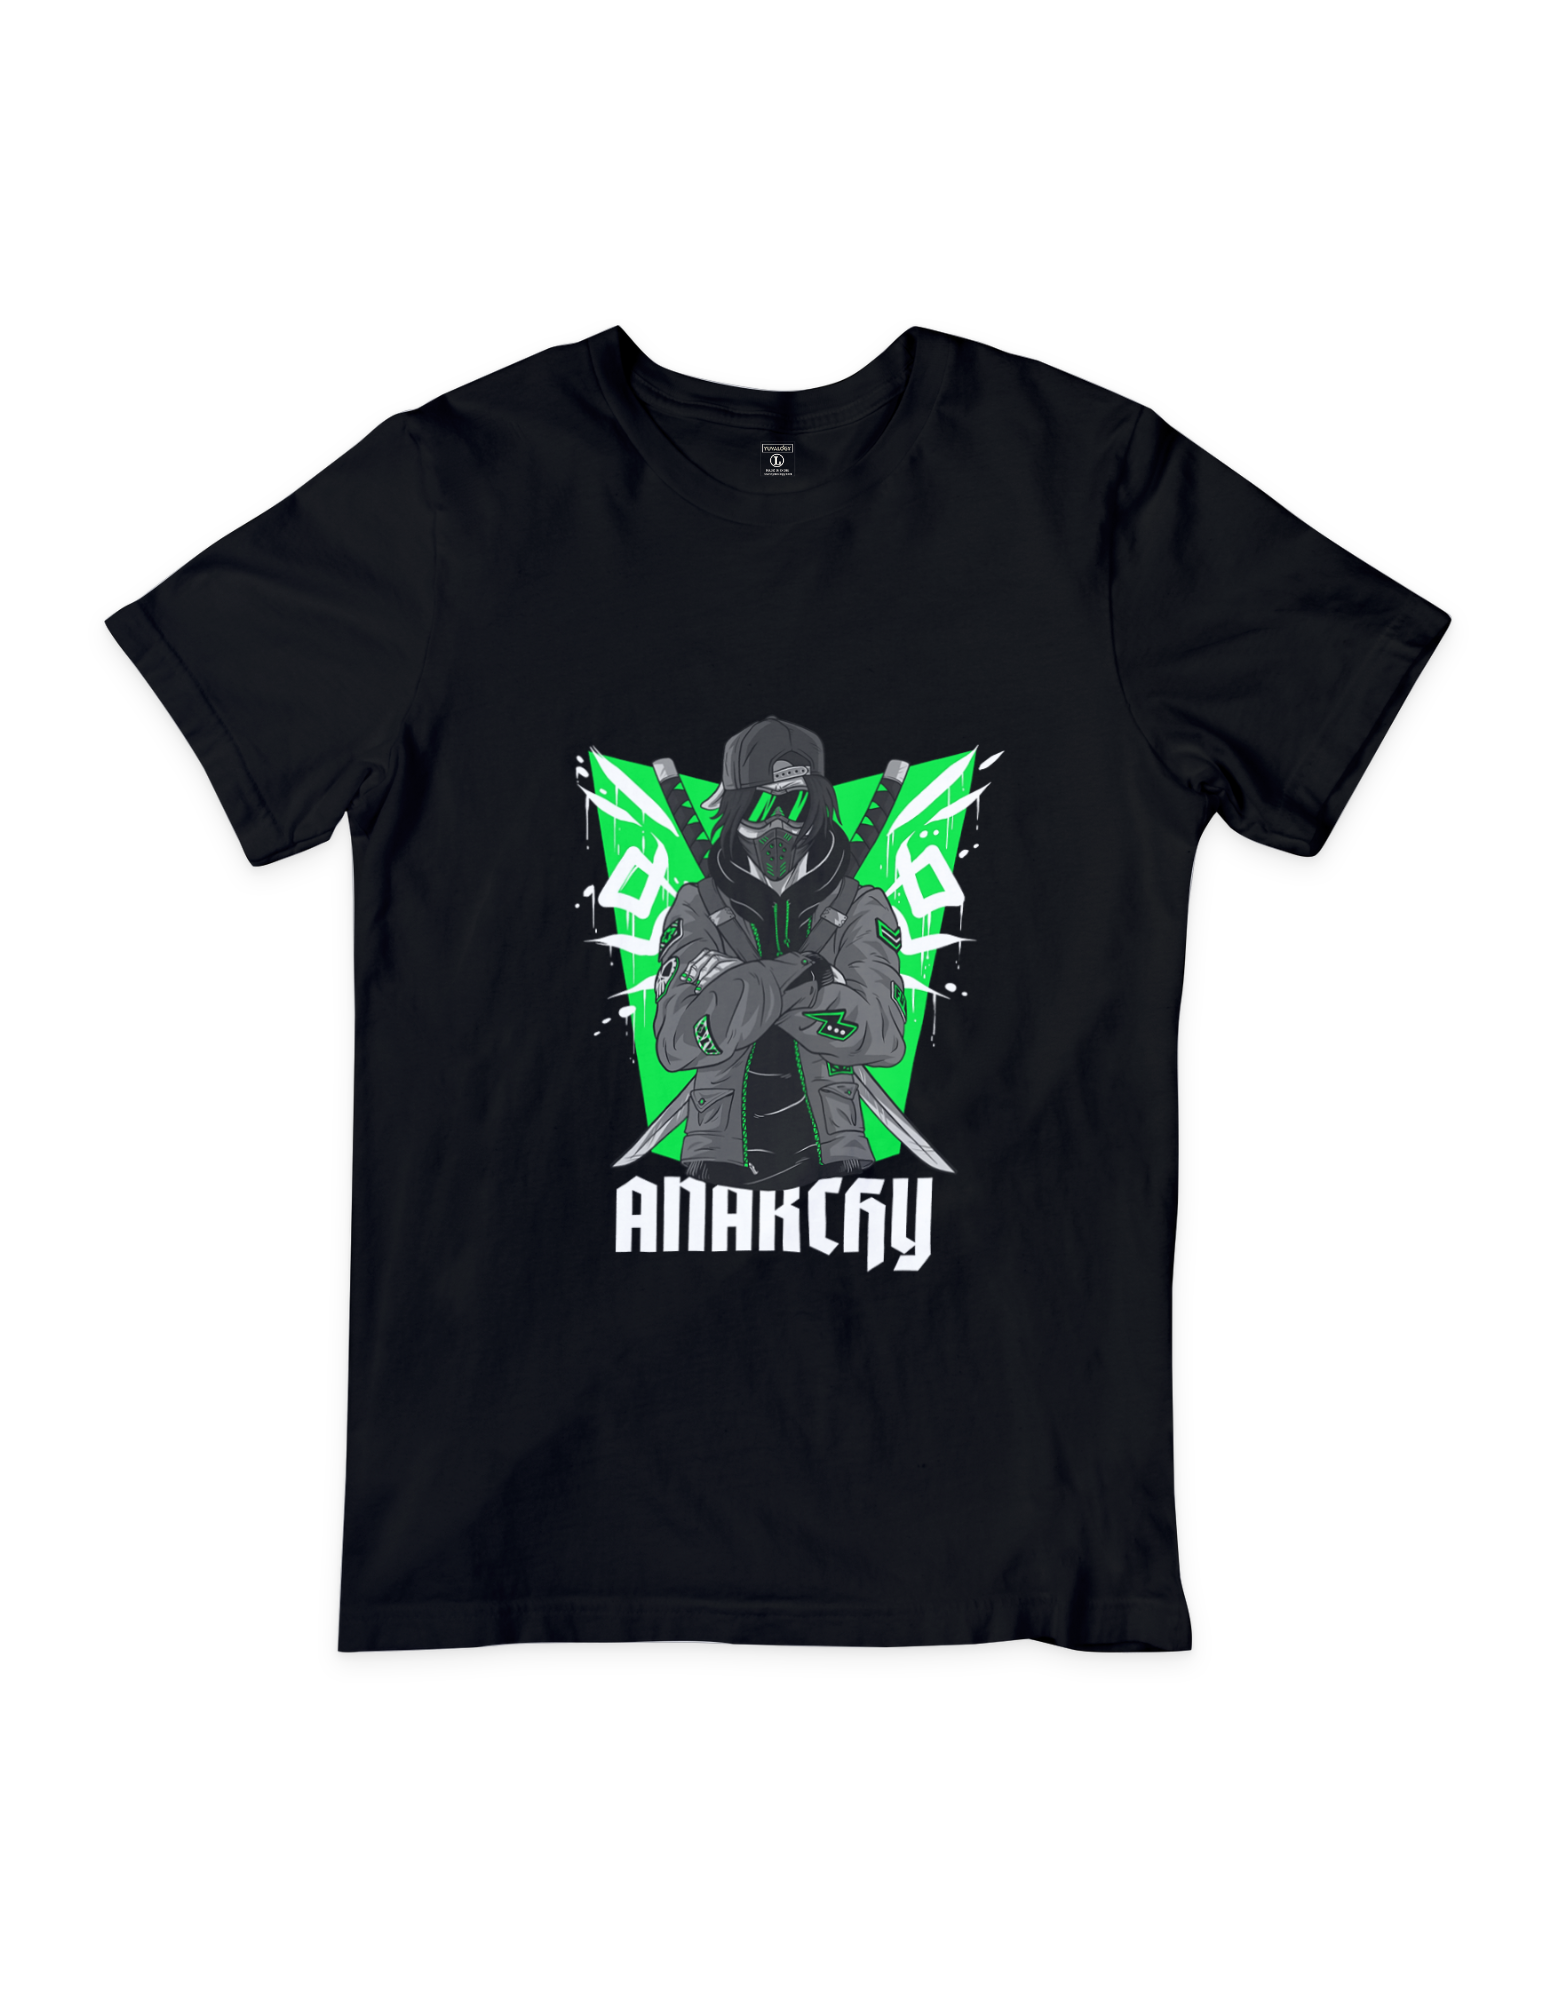 Anarchy design t-shirt featuring a bold and rebellious graphic print